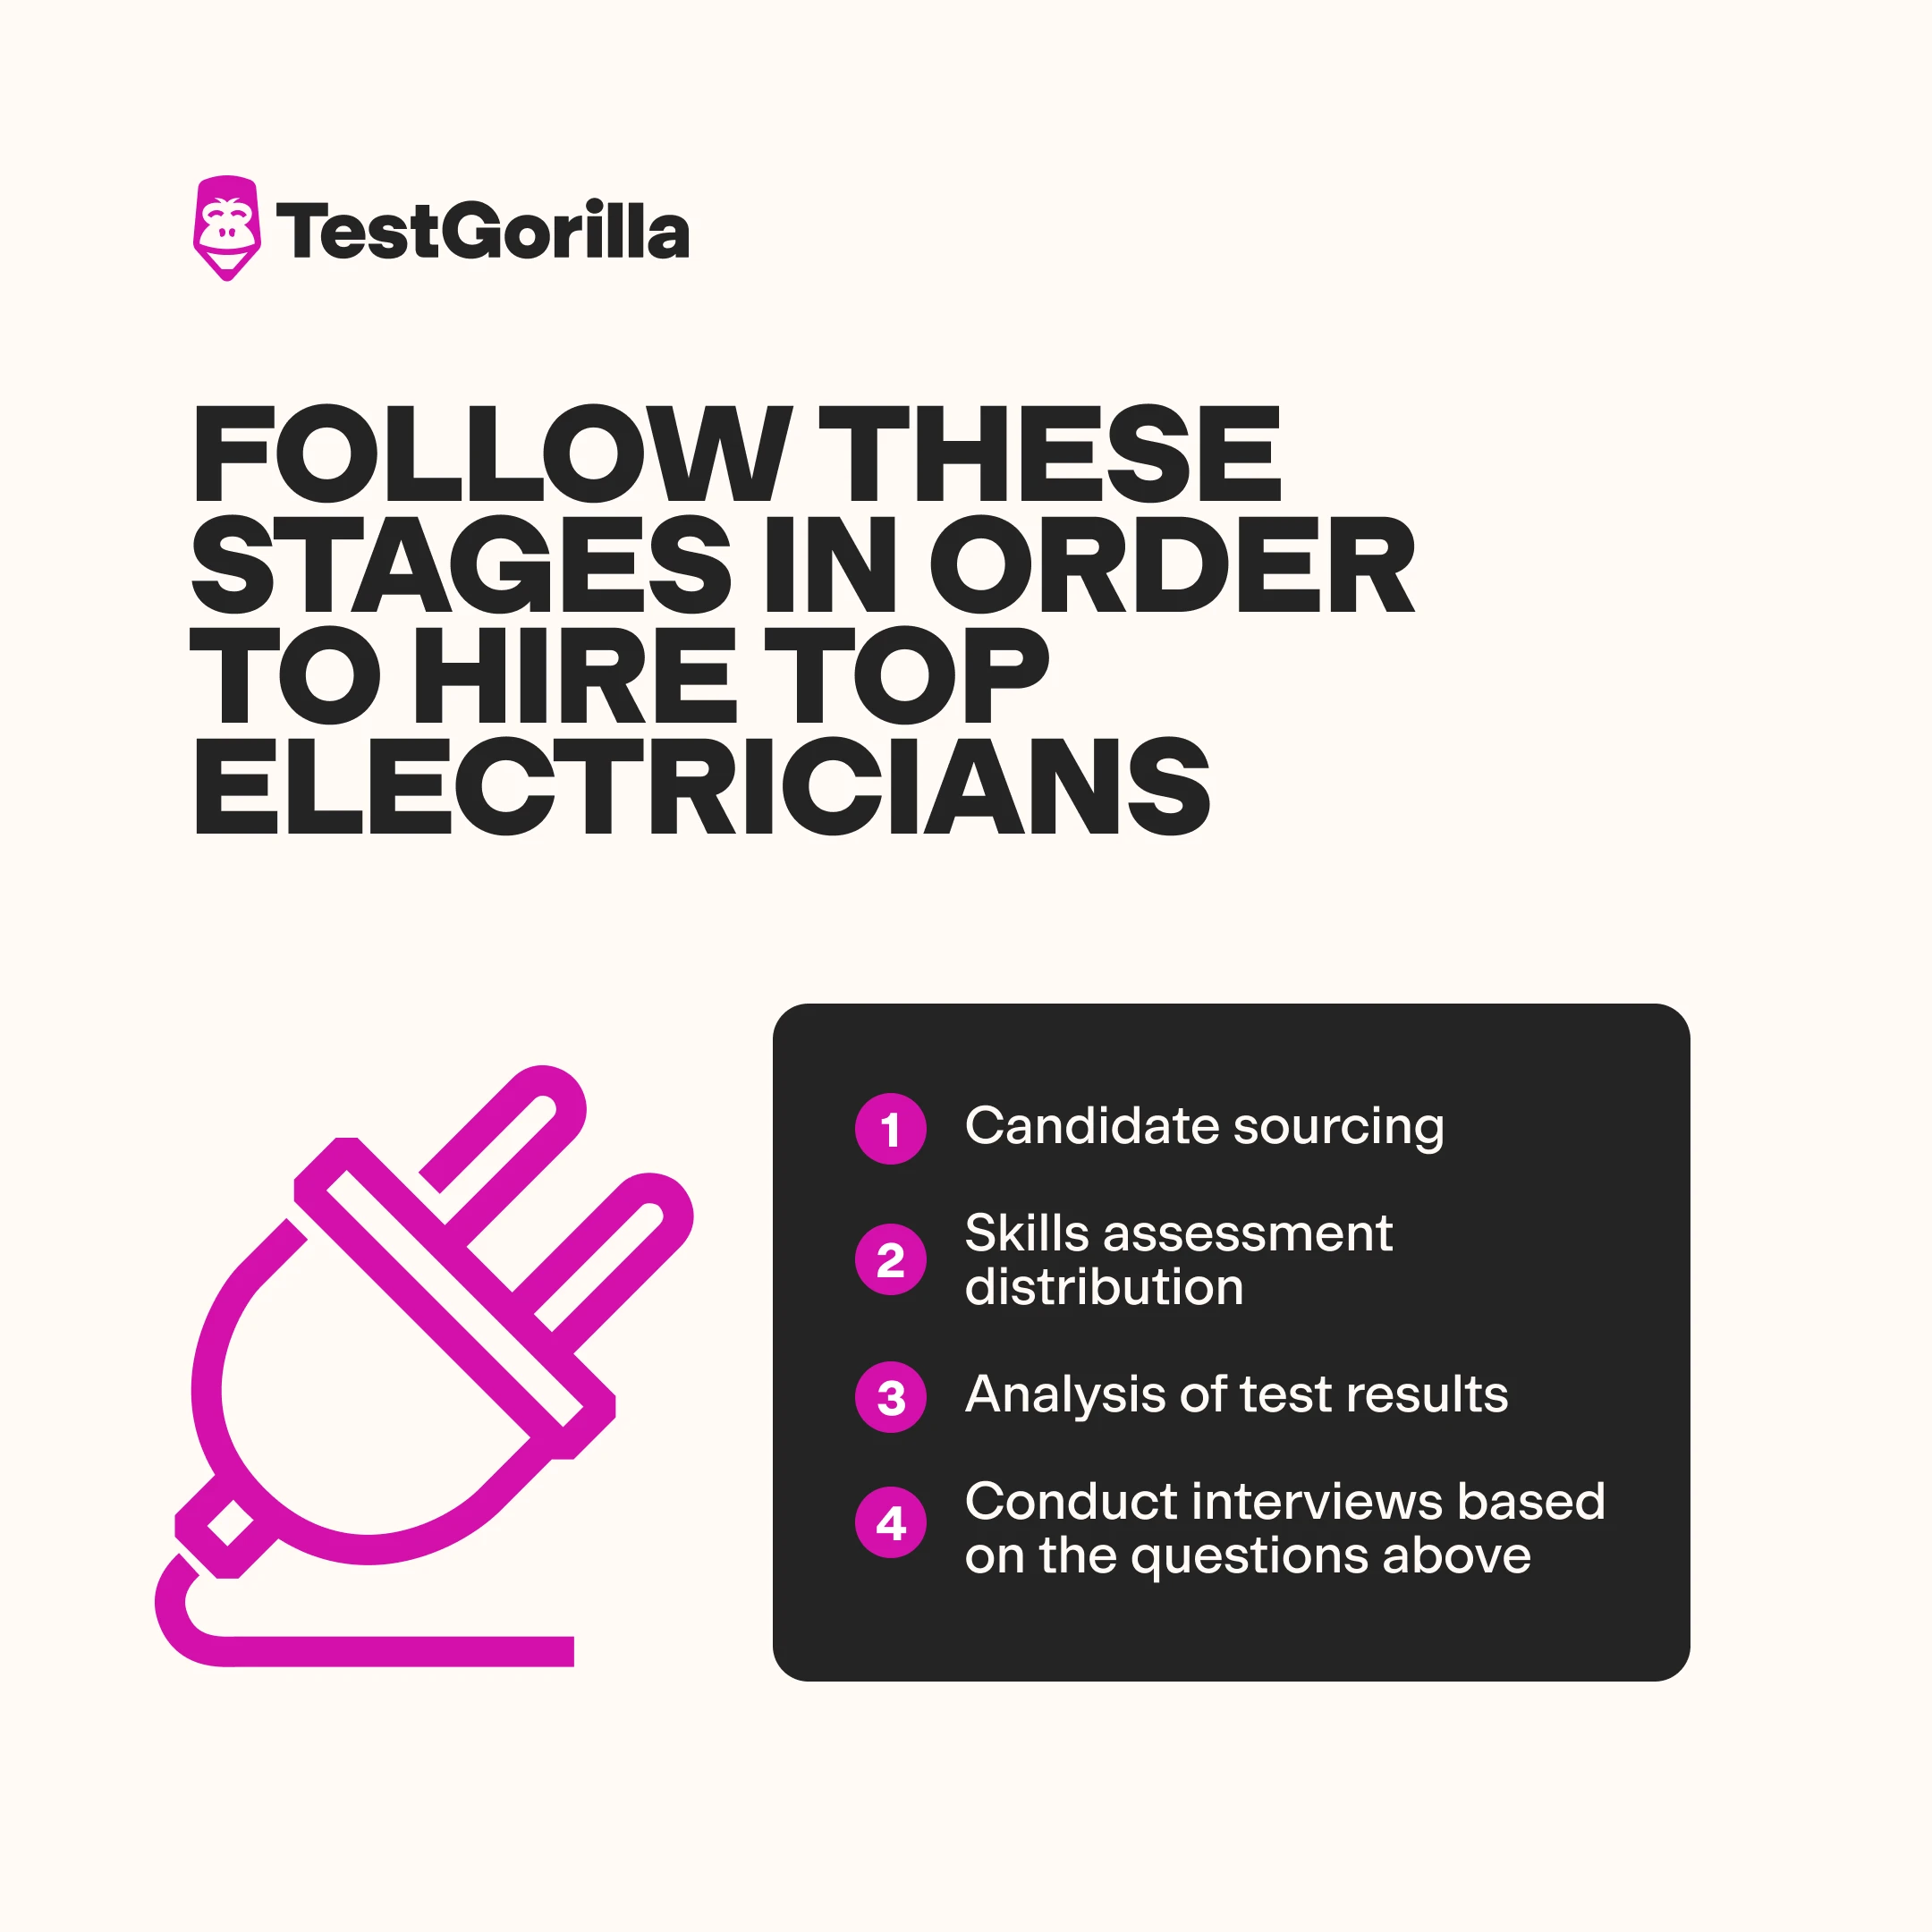 Follow these steps when hiring electricians